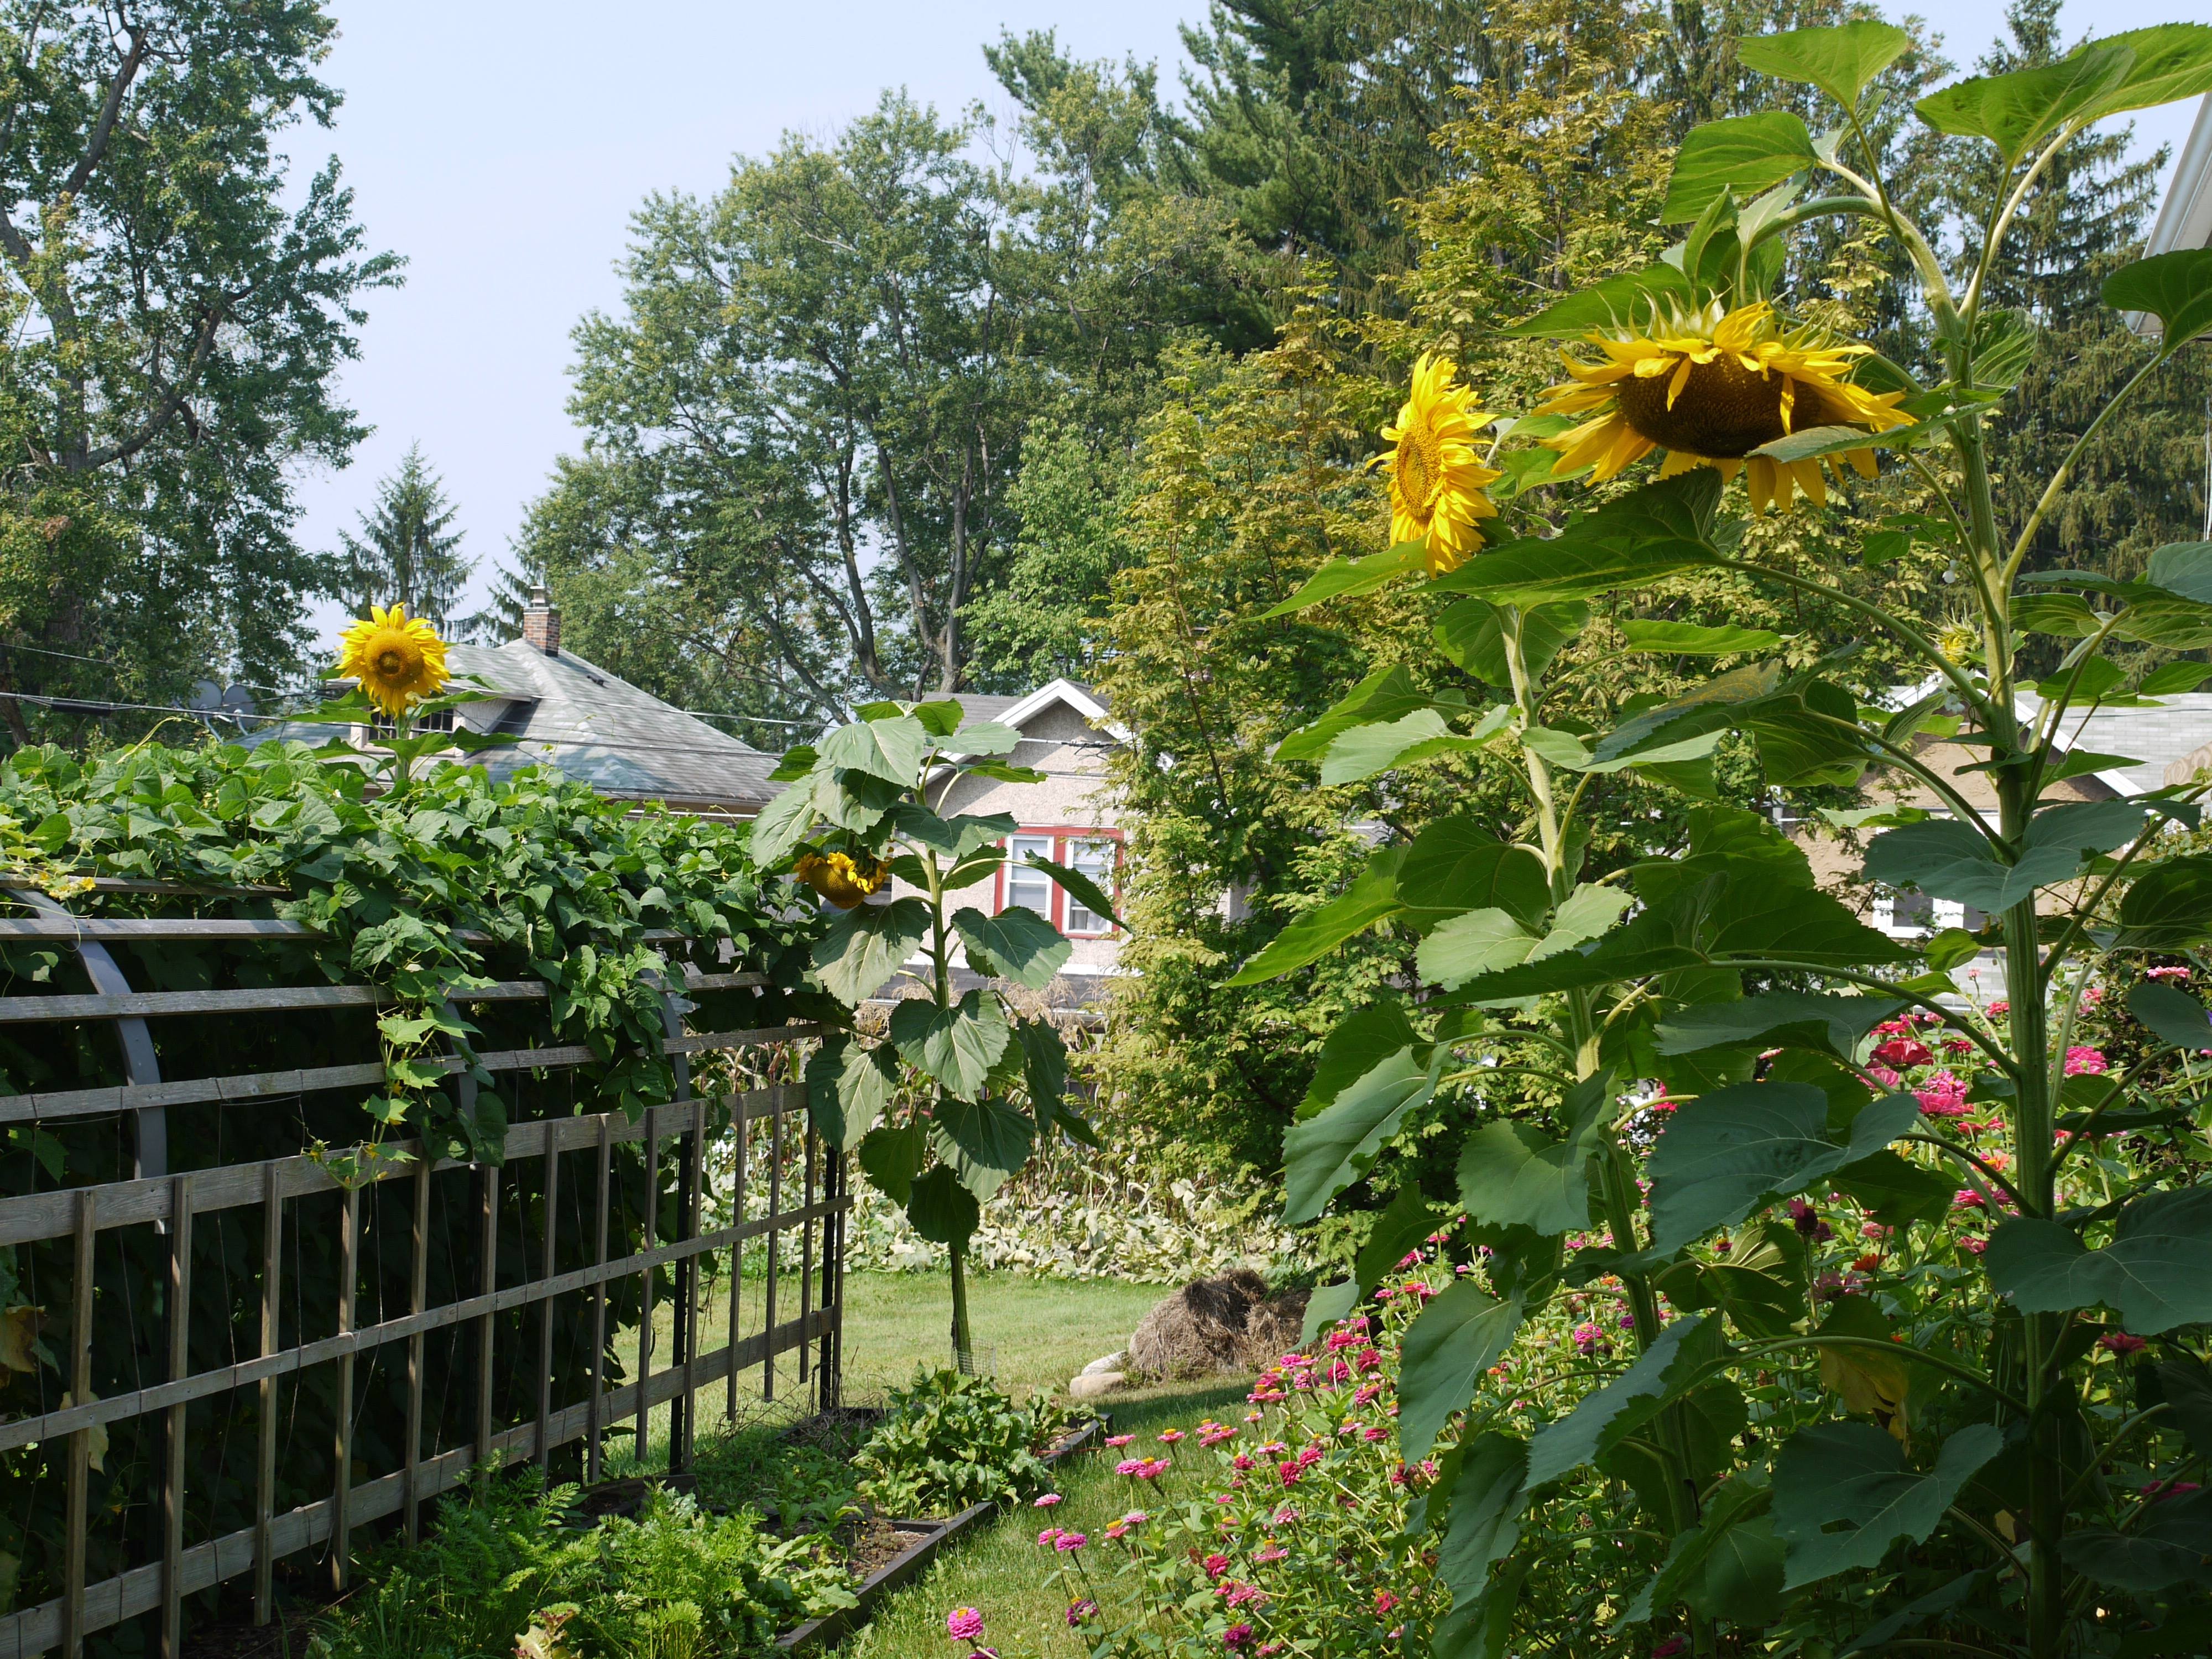 Giant sunflowers towering above the garden